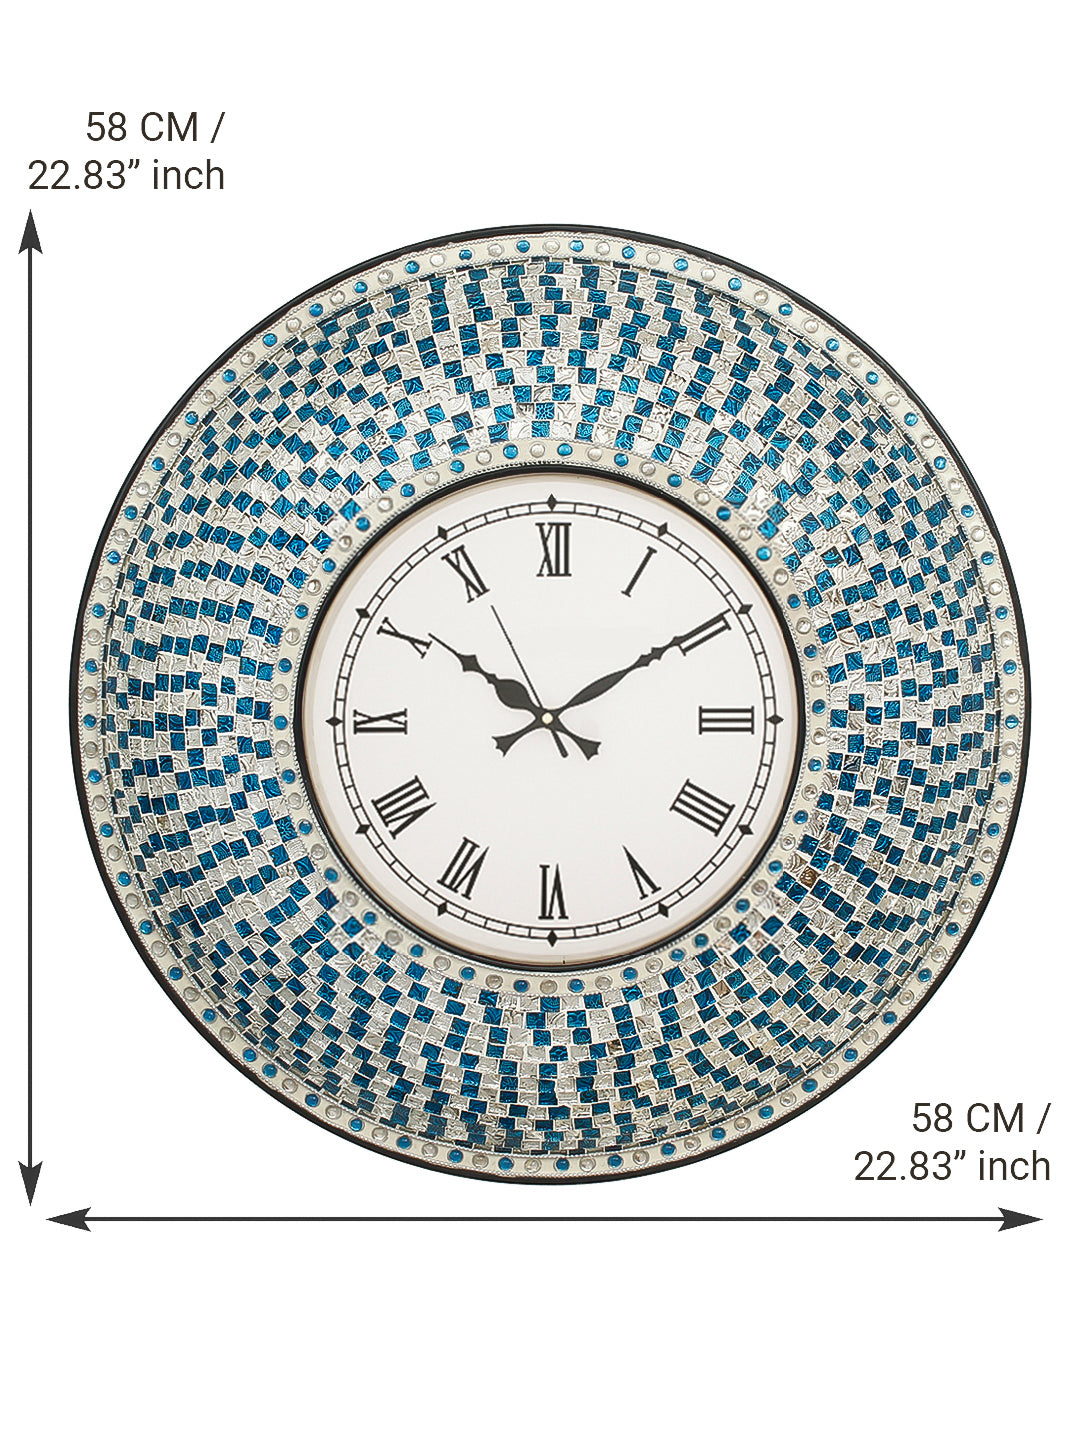 Blue Mosaic Glass & Wood Round Handcrafted Analog Ethnic Luxury Roman Numeral Wall Clock 3